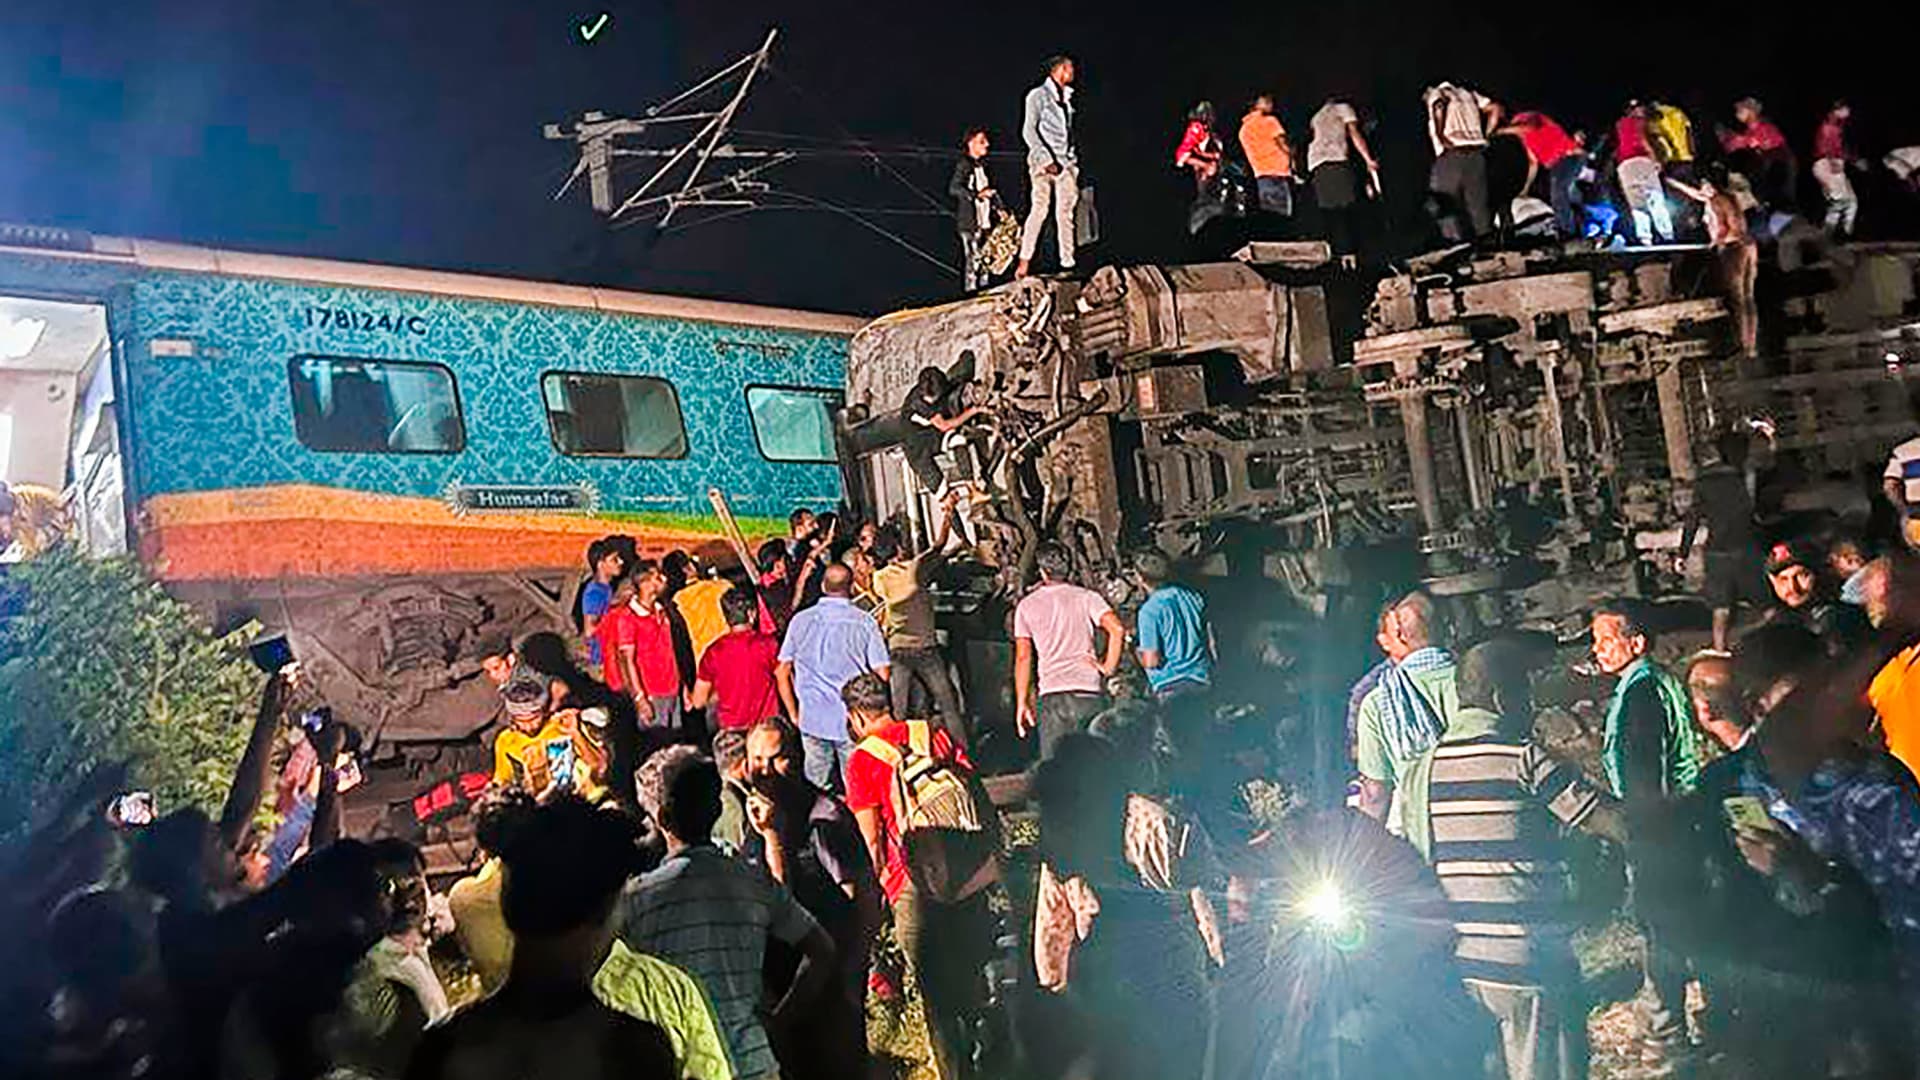 India train crash kills more than 280, injures 900 in one of the nation's worst rail disasters